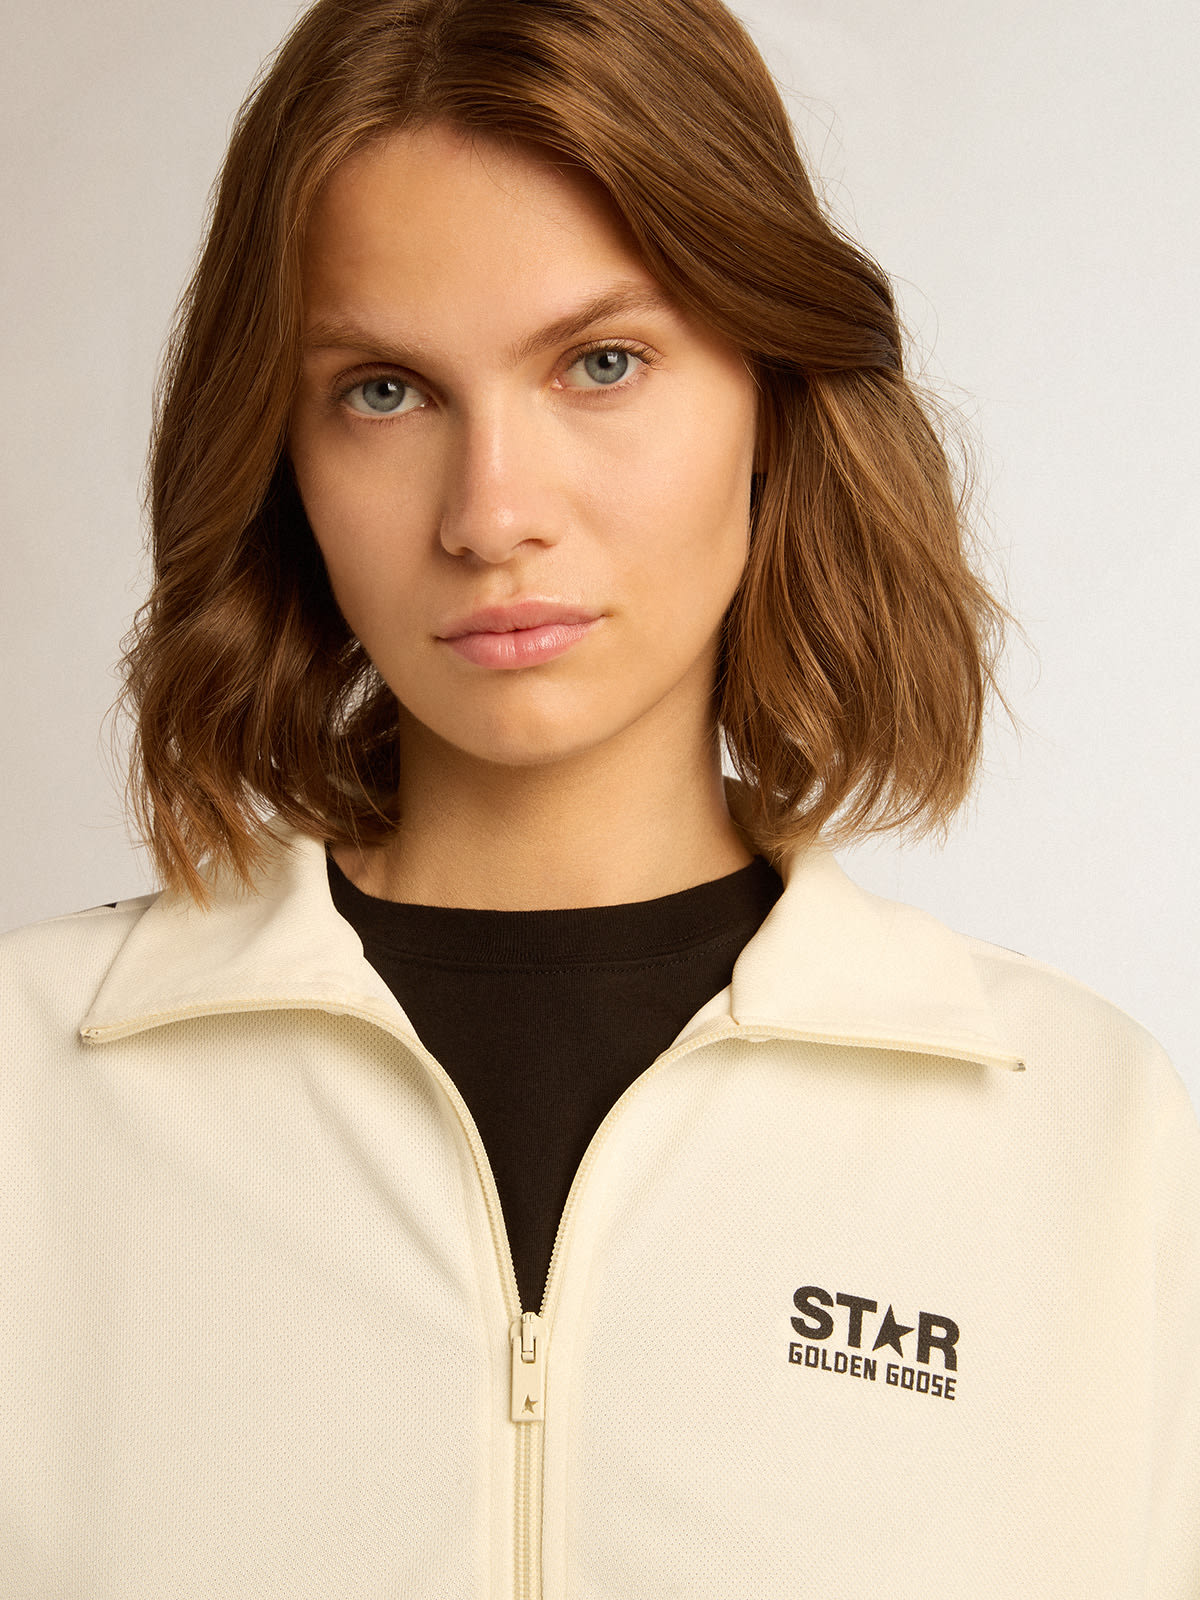 Golden Goose - Women’s white zipped sweatshirt with white strip and black stars in 